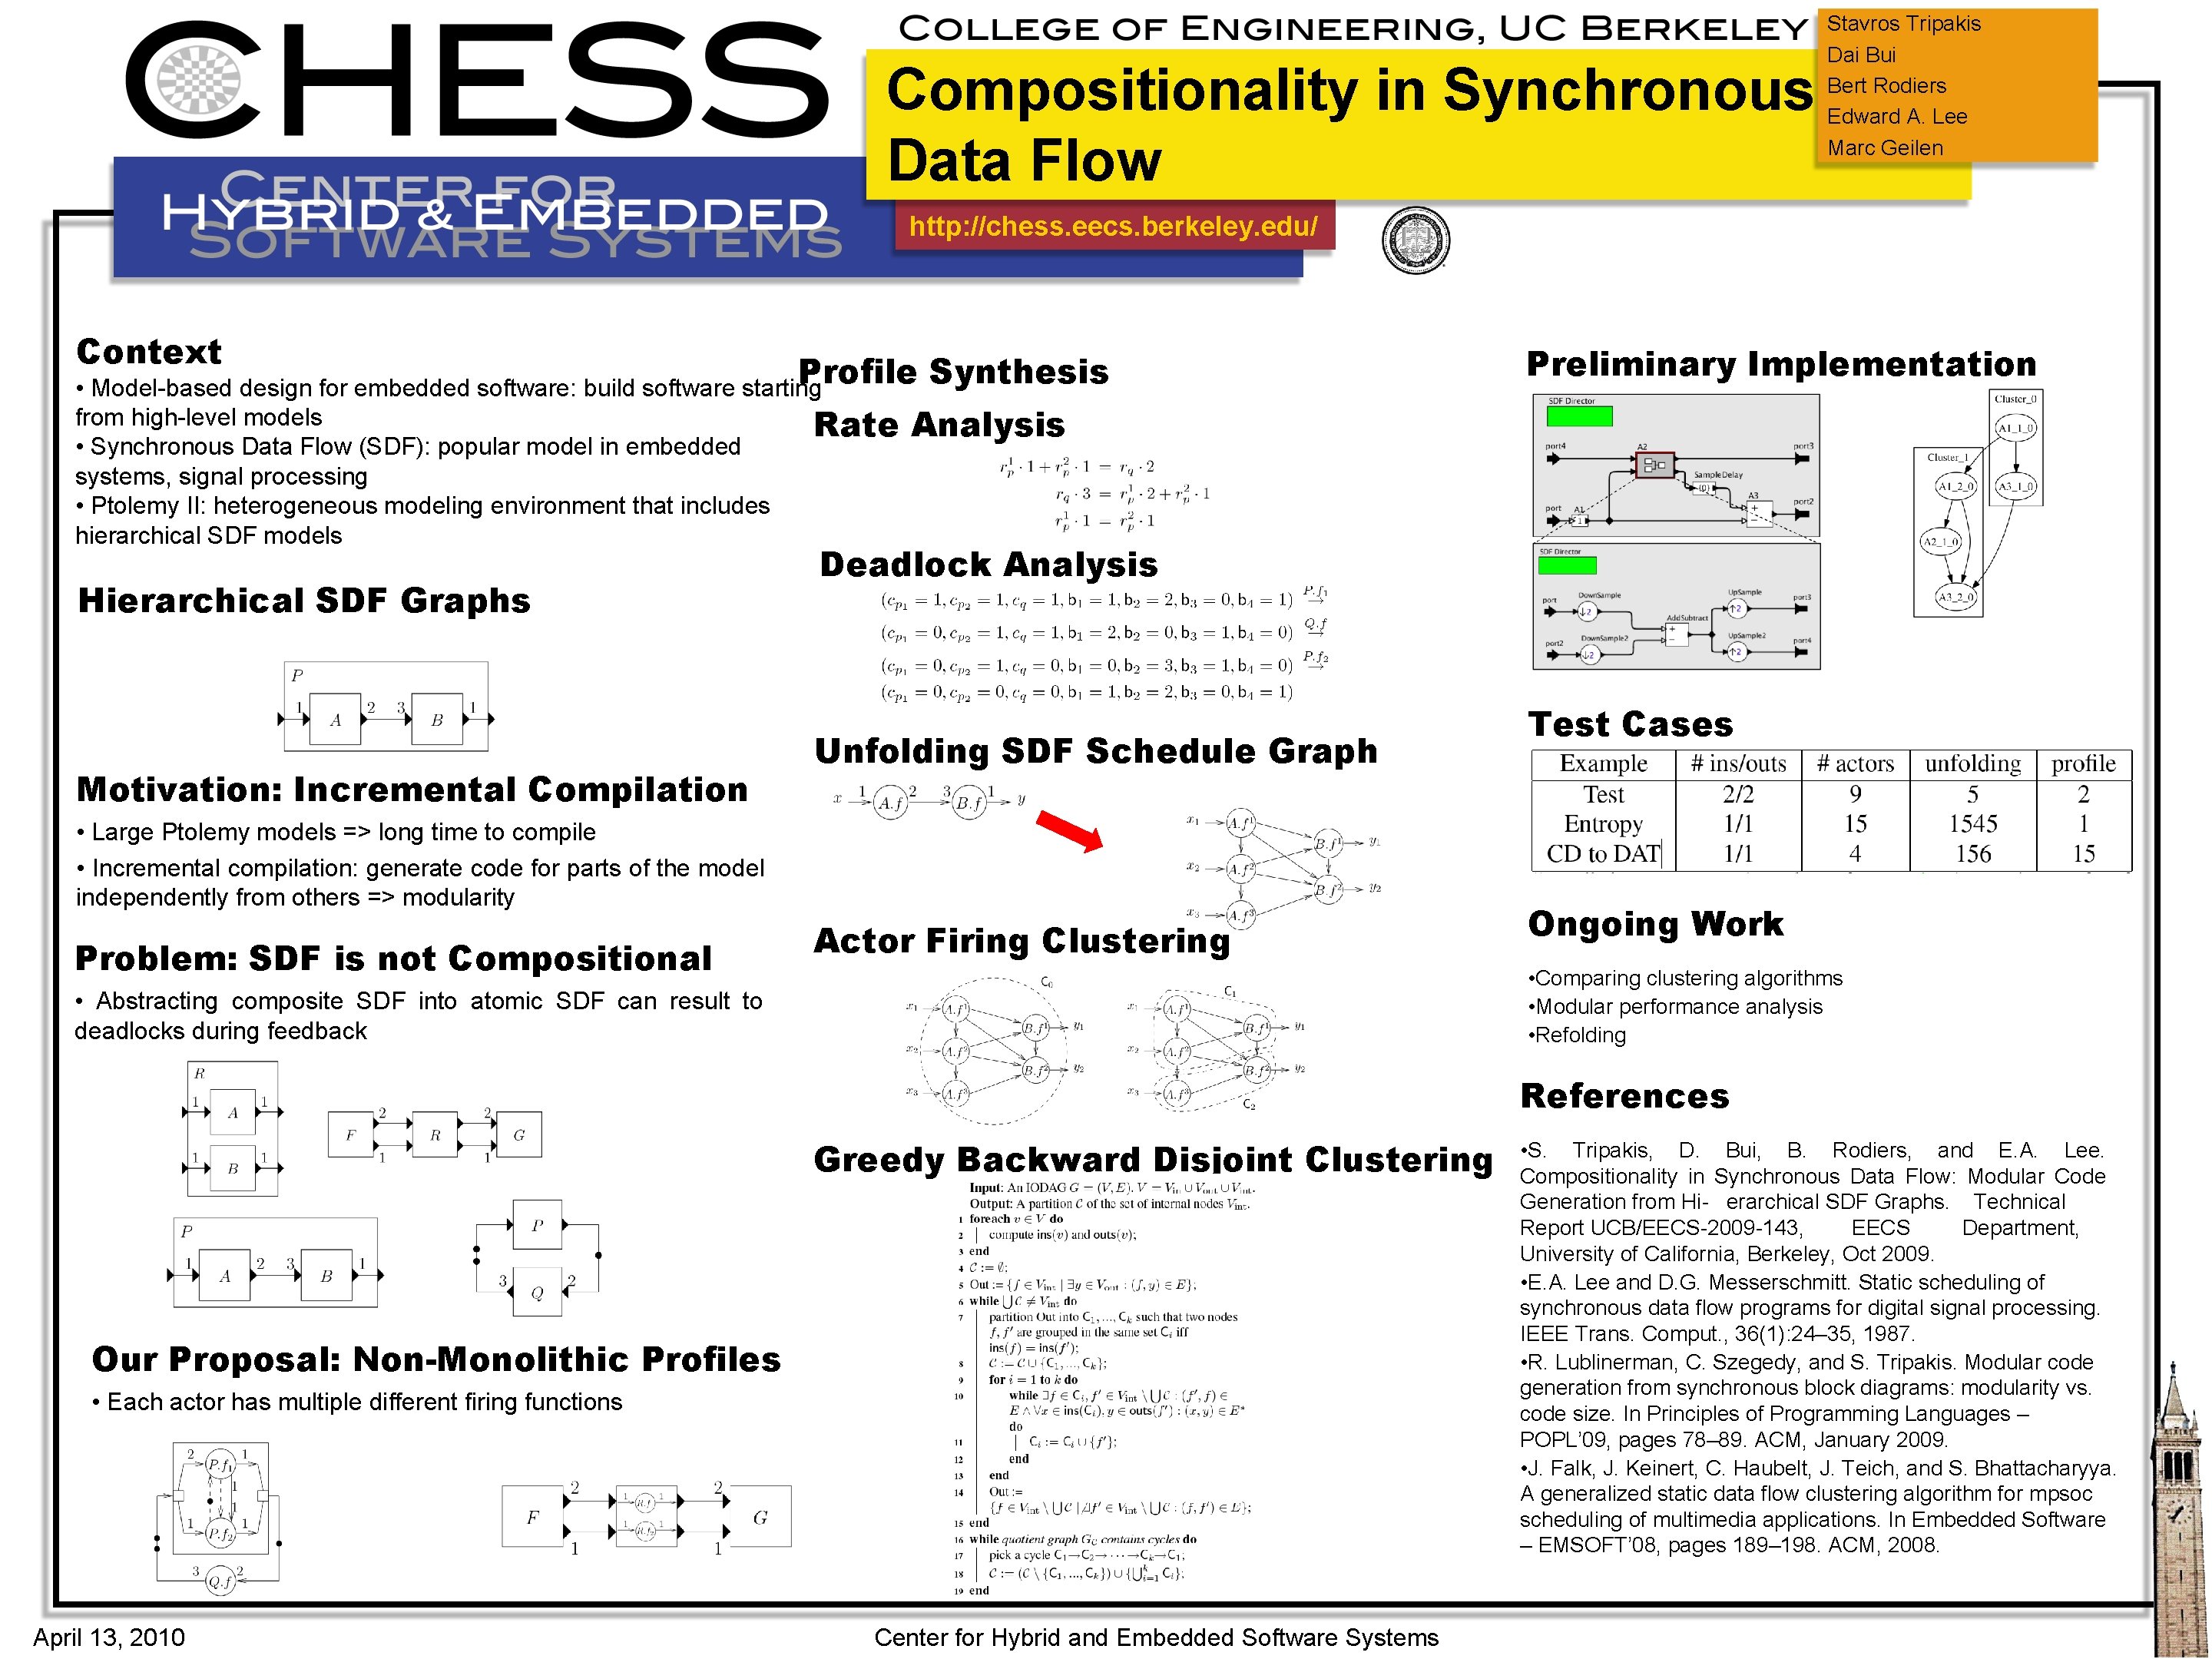 Compositionality in Synchronous Data Flow Stavros Tripakis Dai Bui Bert Rodiers Edward A. Lee